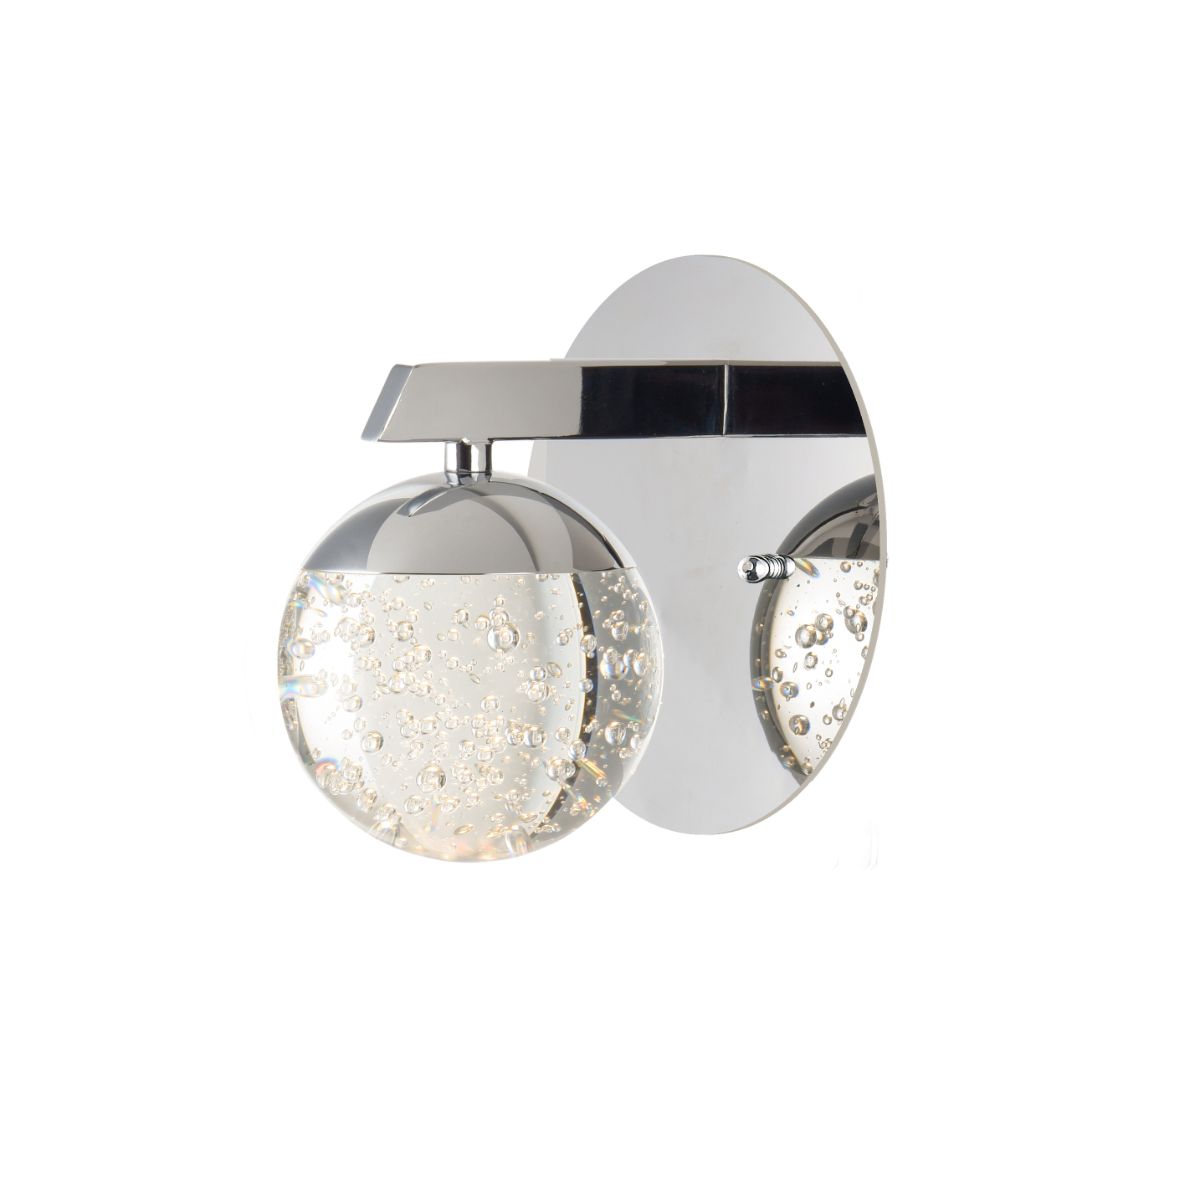 Orb II 7 in. LED Armed Sconce Chrome finish